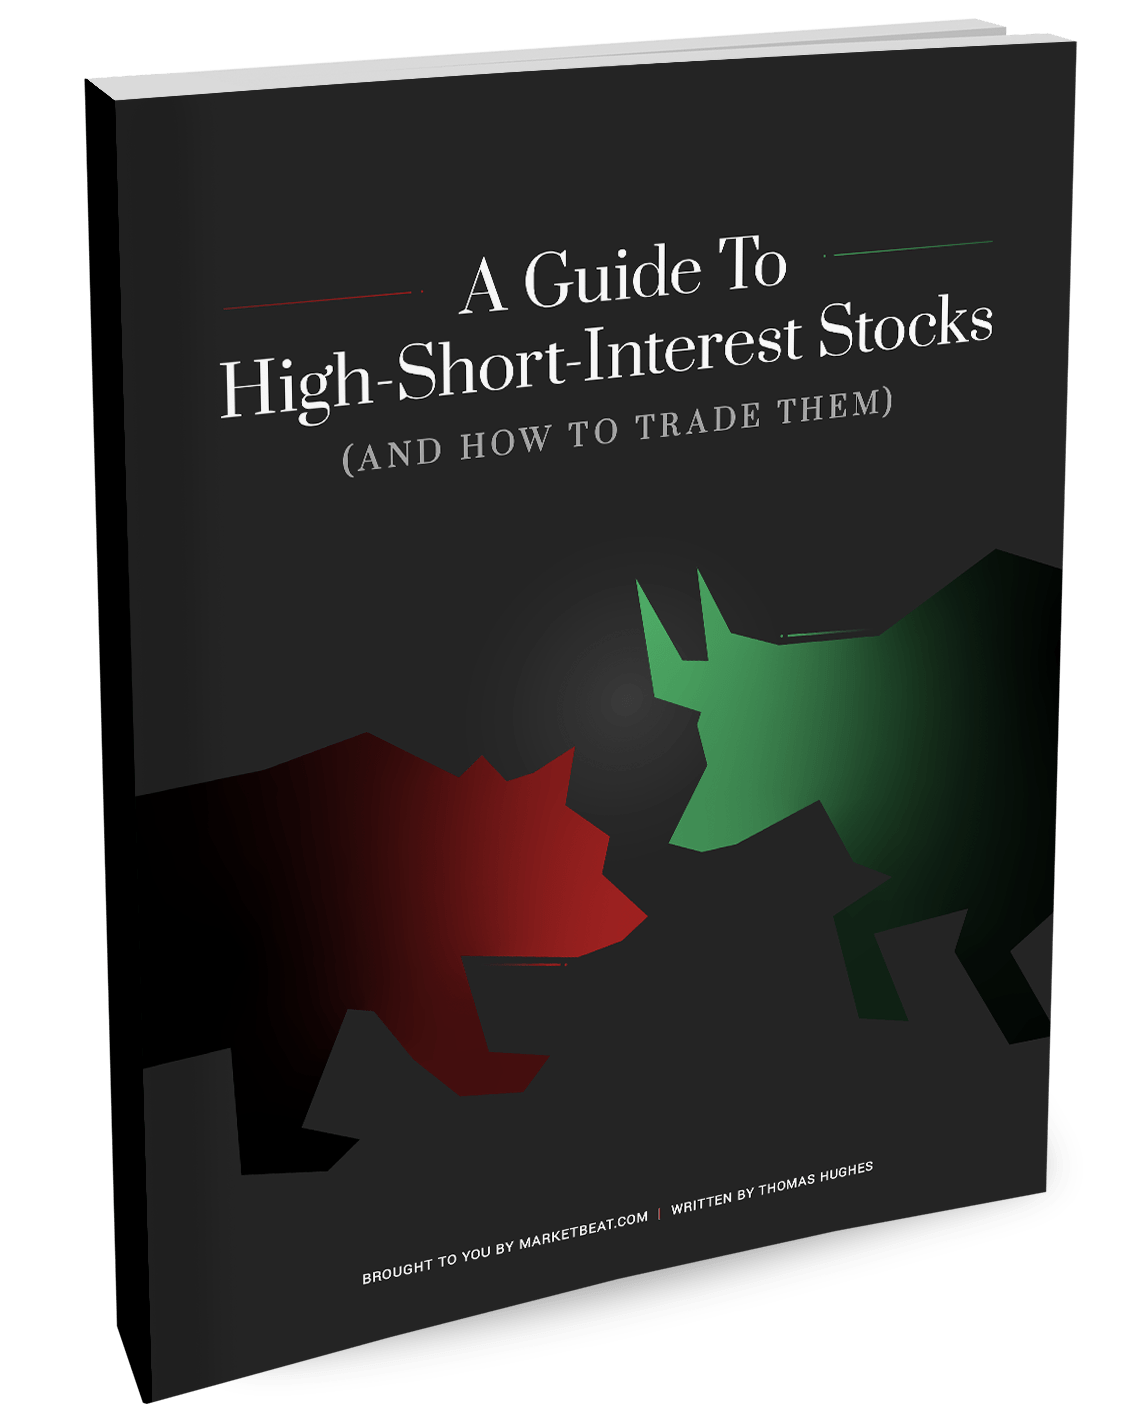 A guide to covering high-short-interest stocks